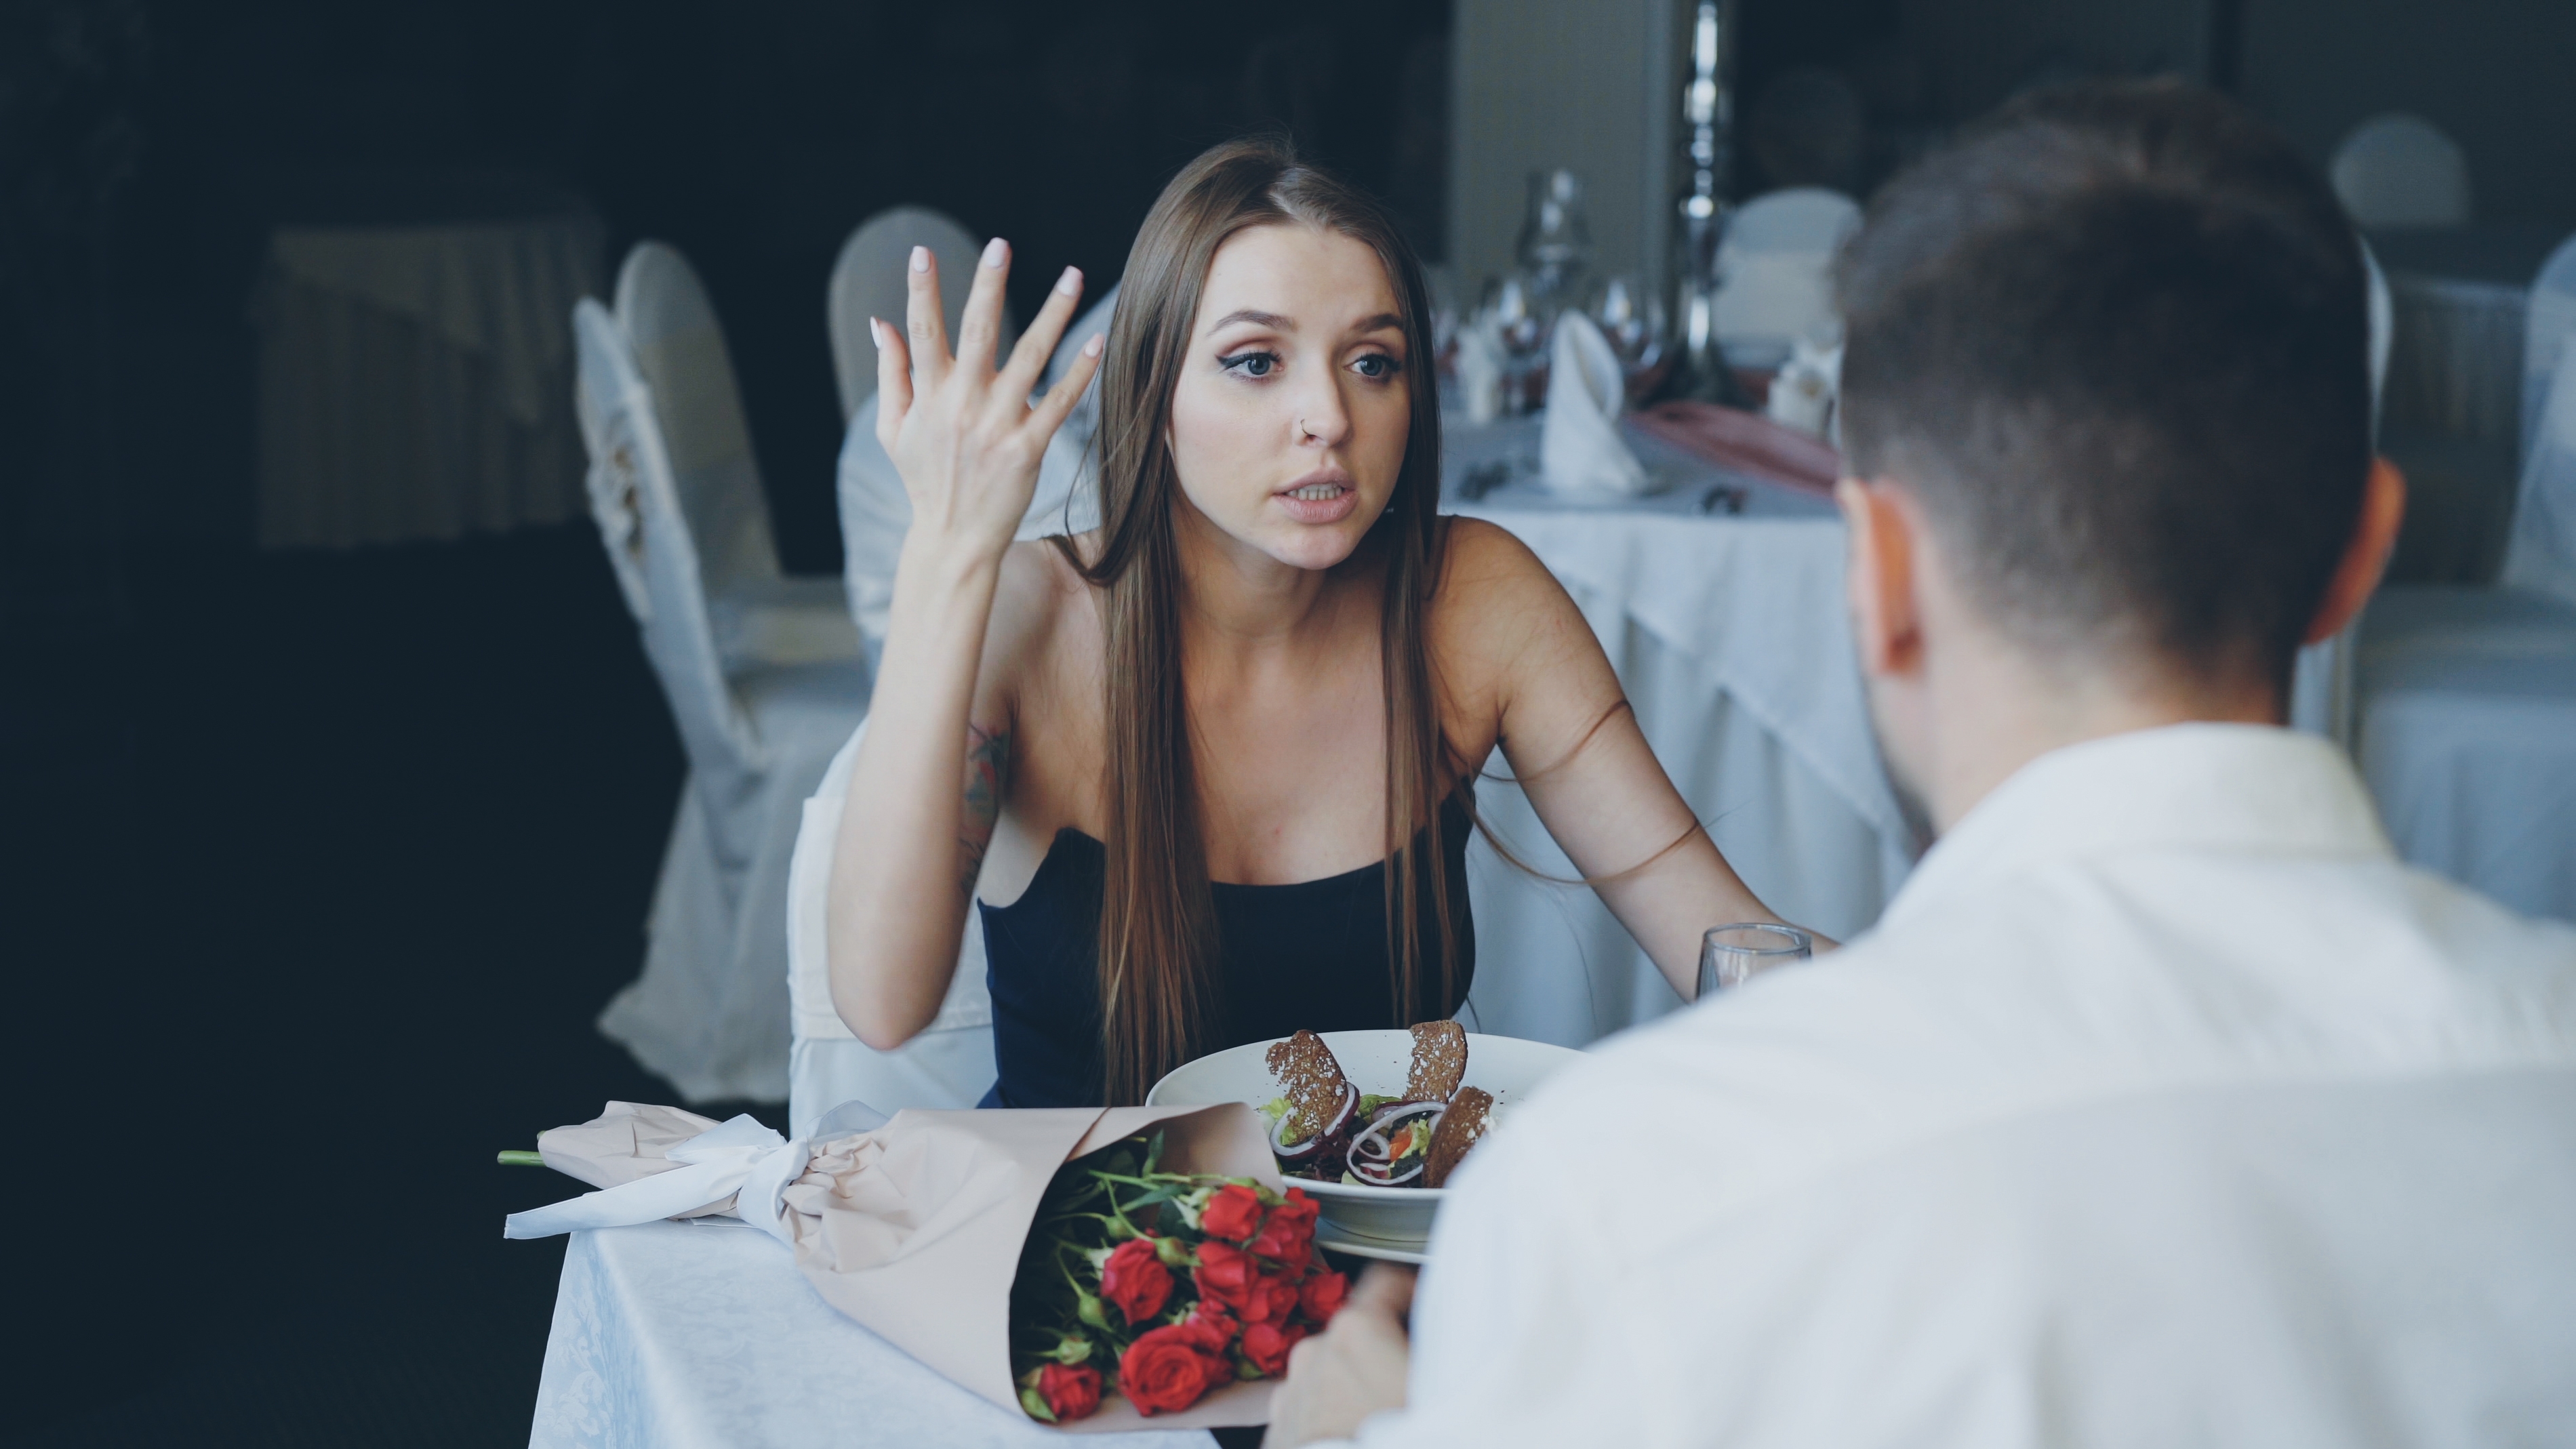 Woman arguing with his lover on a date | Source: Shutterstock